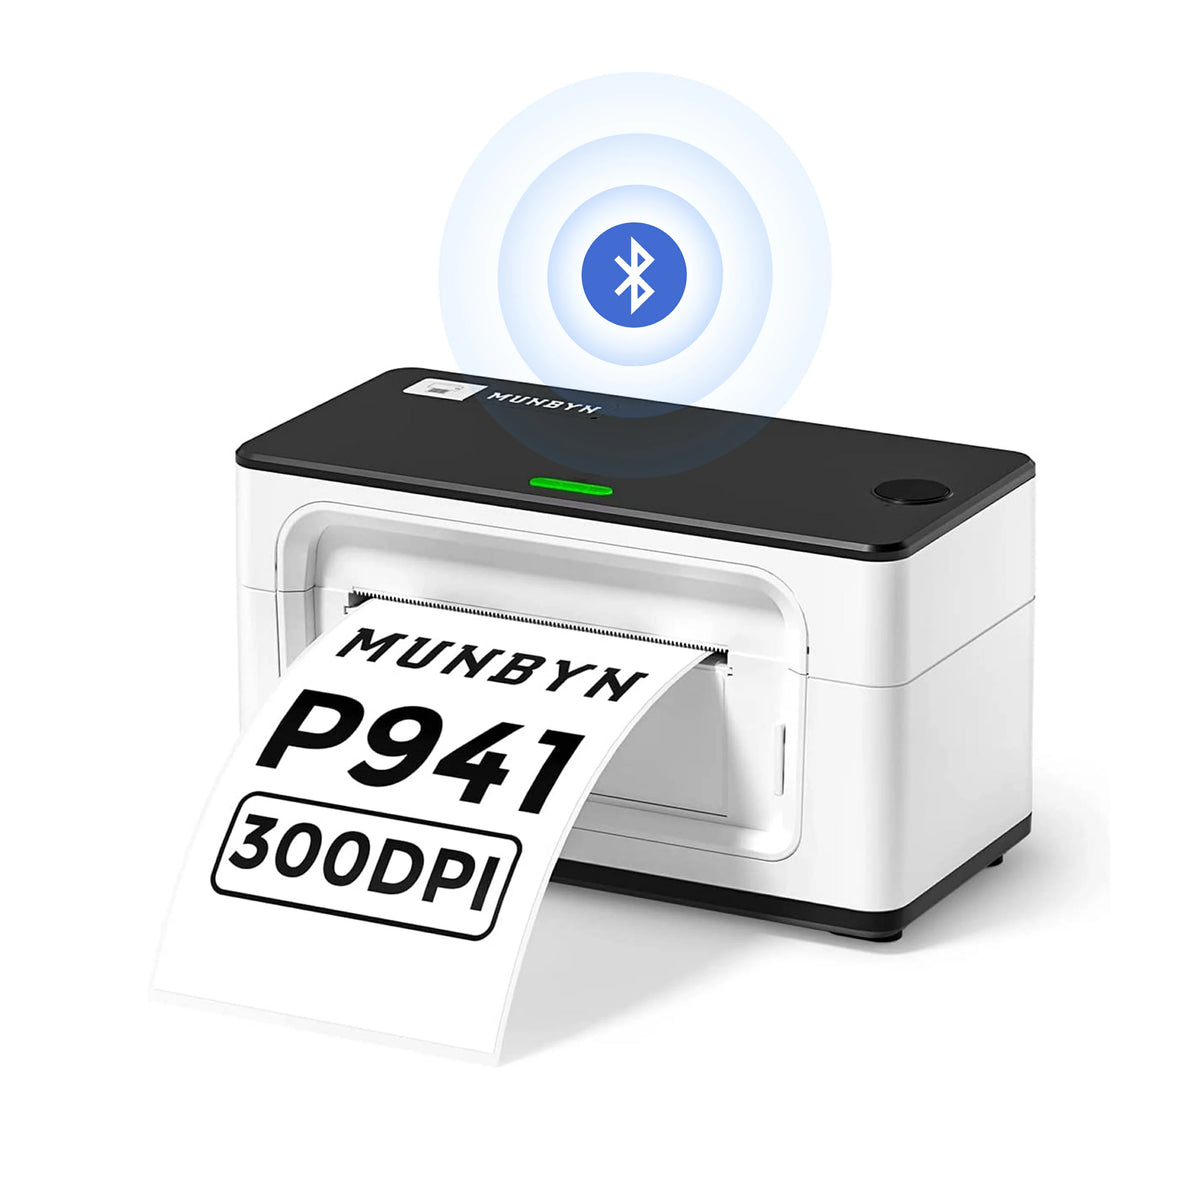 MUNBYN Bluetooth label printer P941B is compact and portable.